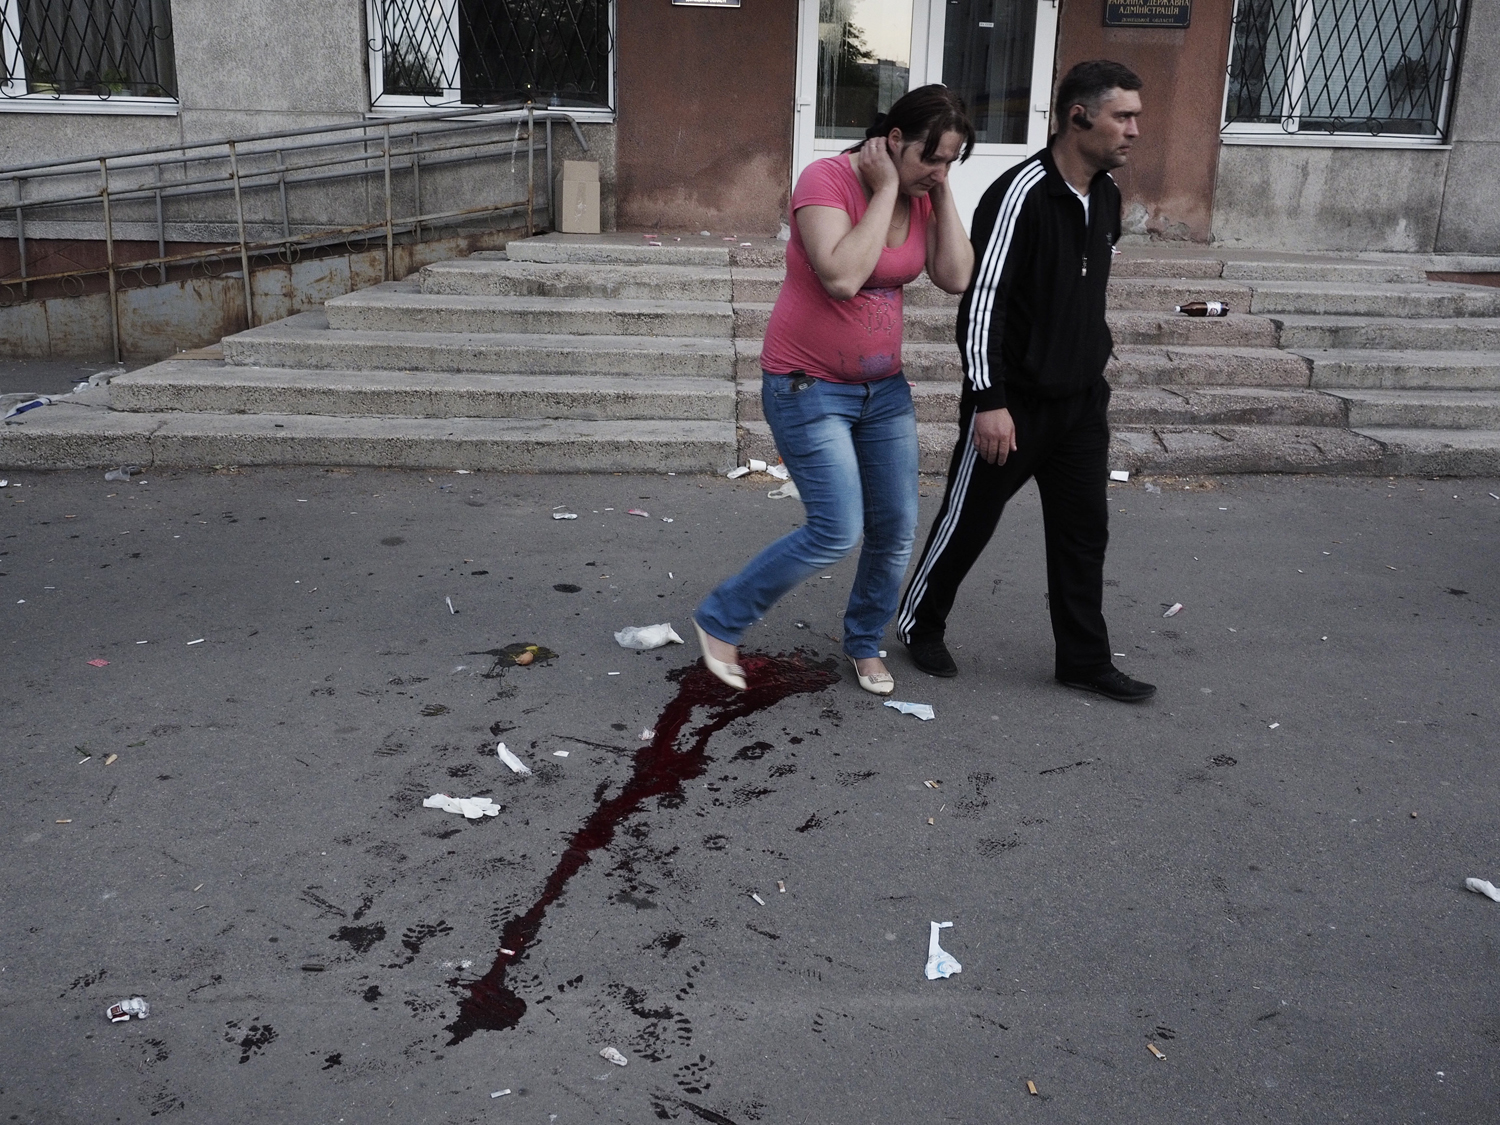 May 11, 2014. A man and woman walk through the blood trail left after a man was shot by an armed guard.